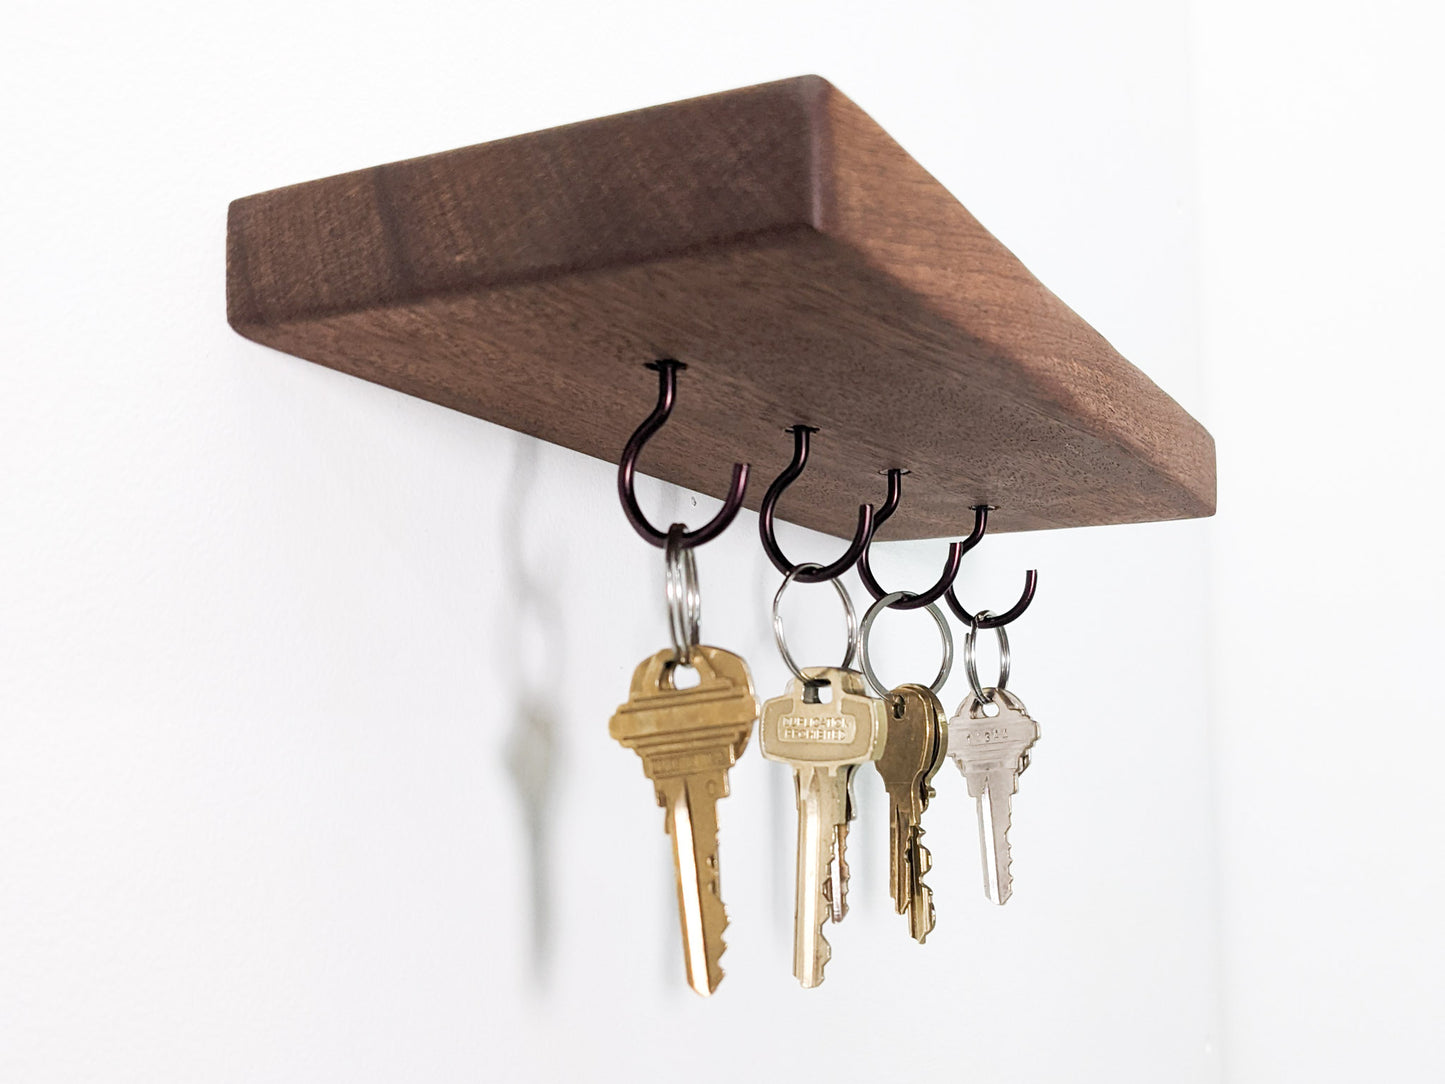 A side view of a floating key hook shelf. The natural grain of the brown mahogany wood presents as vertical-scratch-like-marks that reach up and over the soft beveled edges of the corners. On the secure mahogany base sits a pair of black sunglasses. Below, four hanging black  key hooks hold  eight keys. Four keys are bronze and four are silver. 